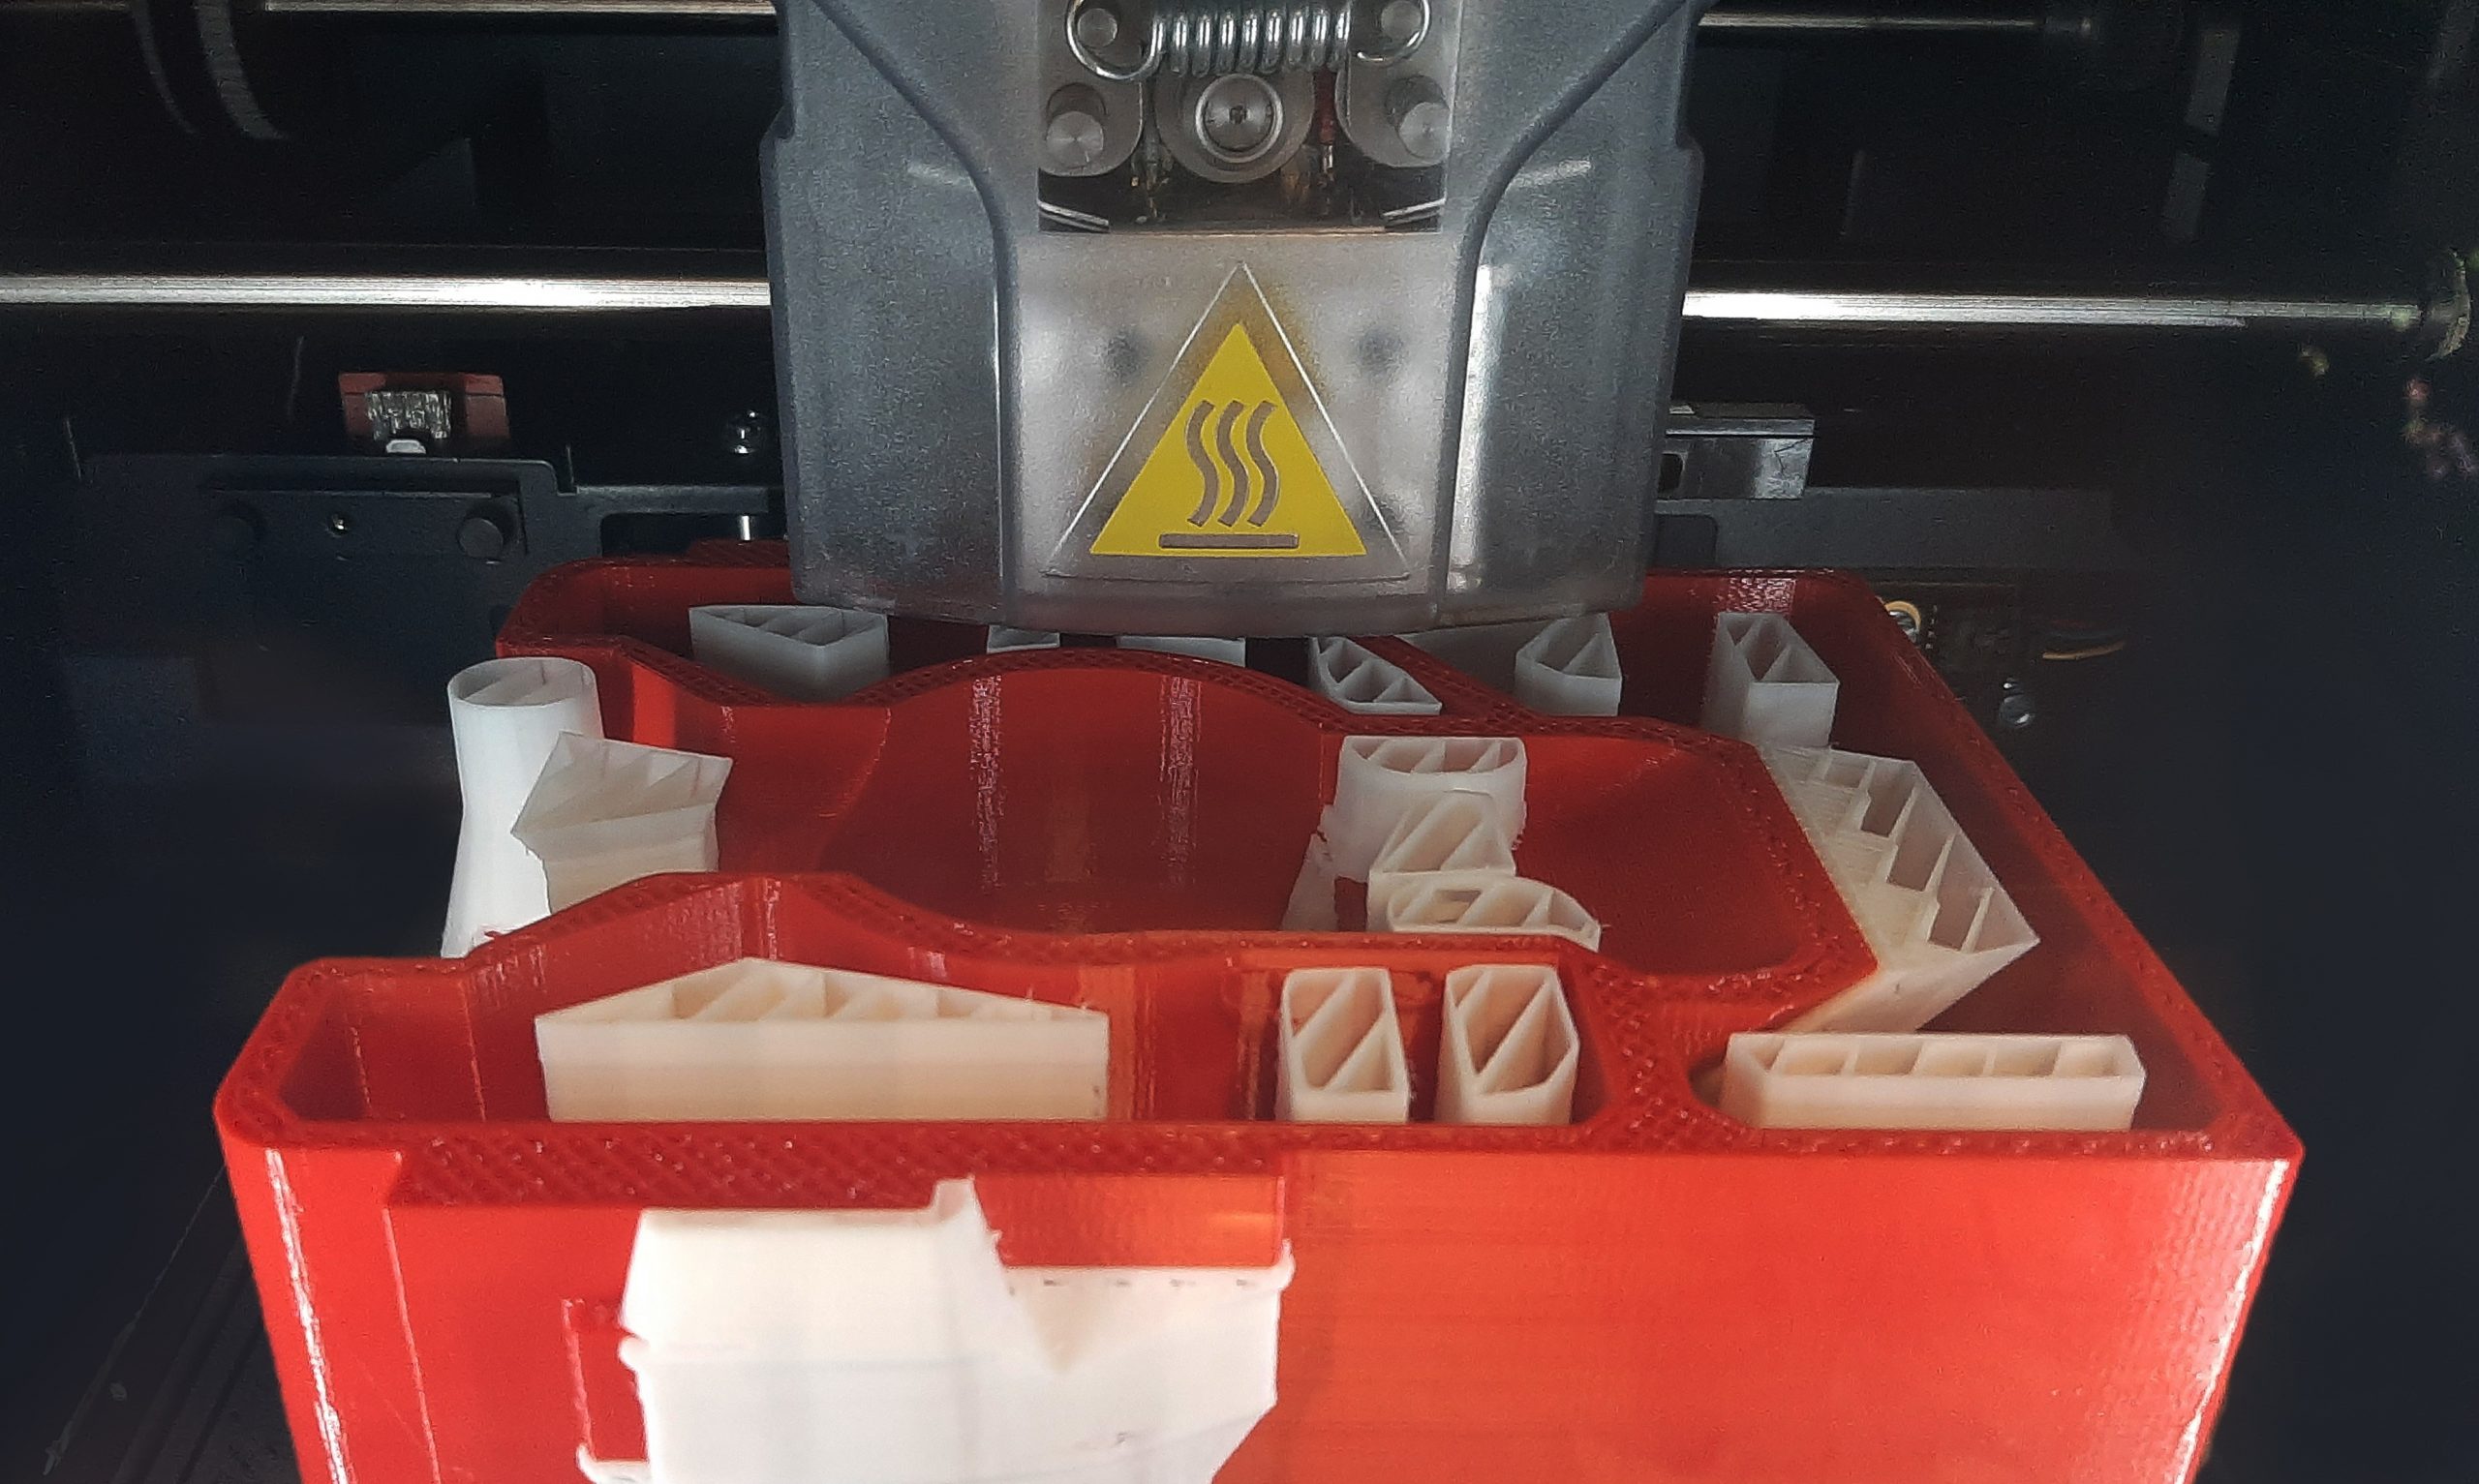 FDM 3D printer printing a red part with white support structure.